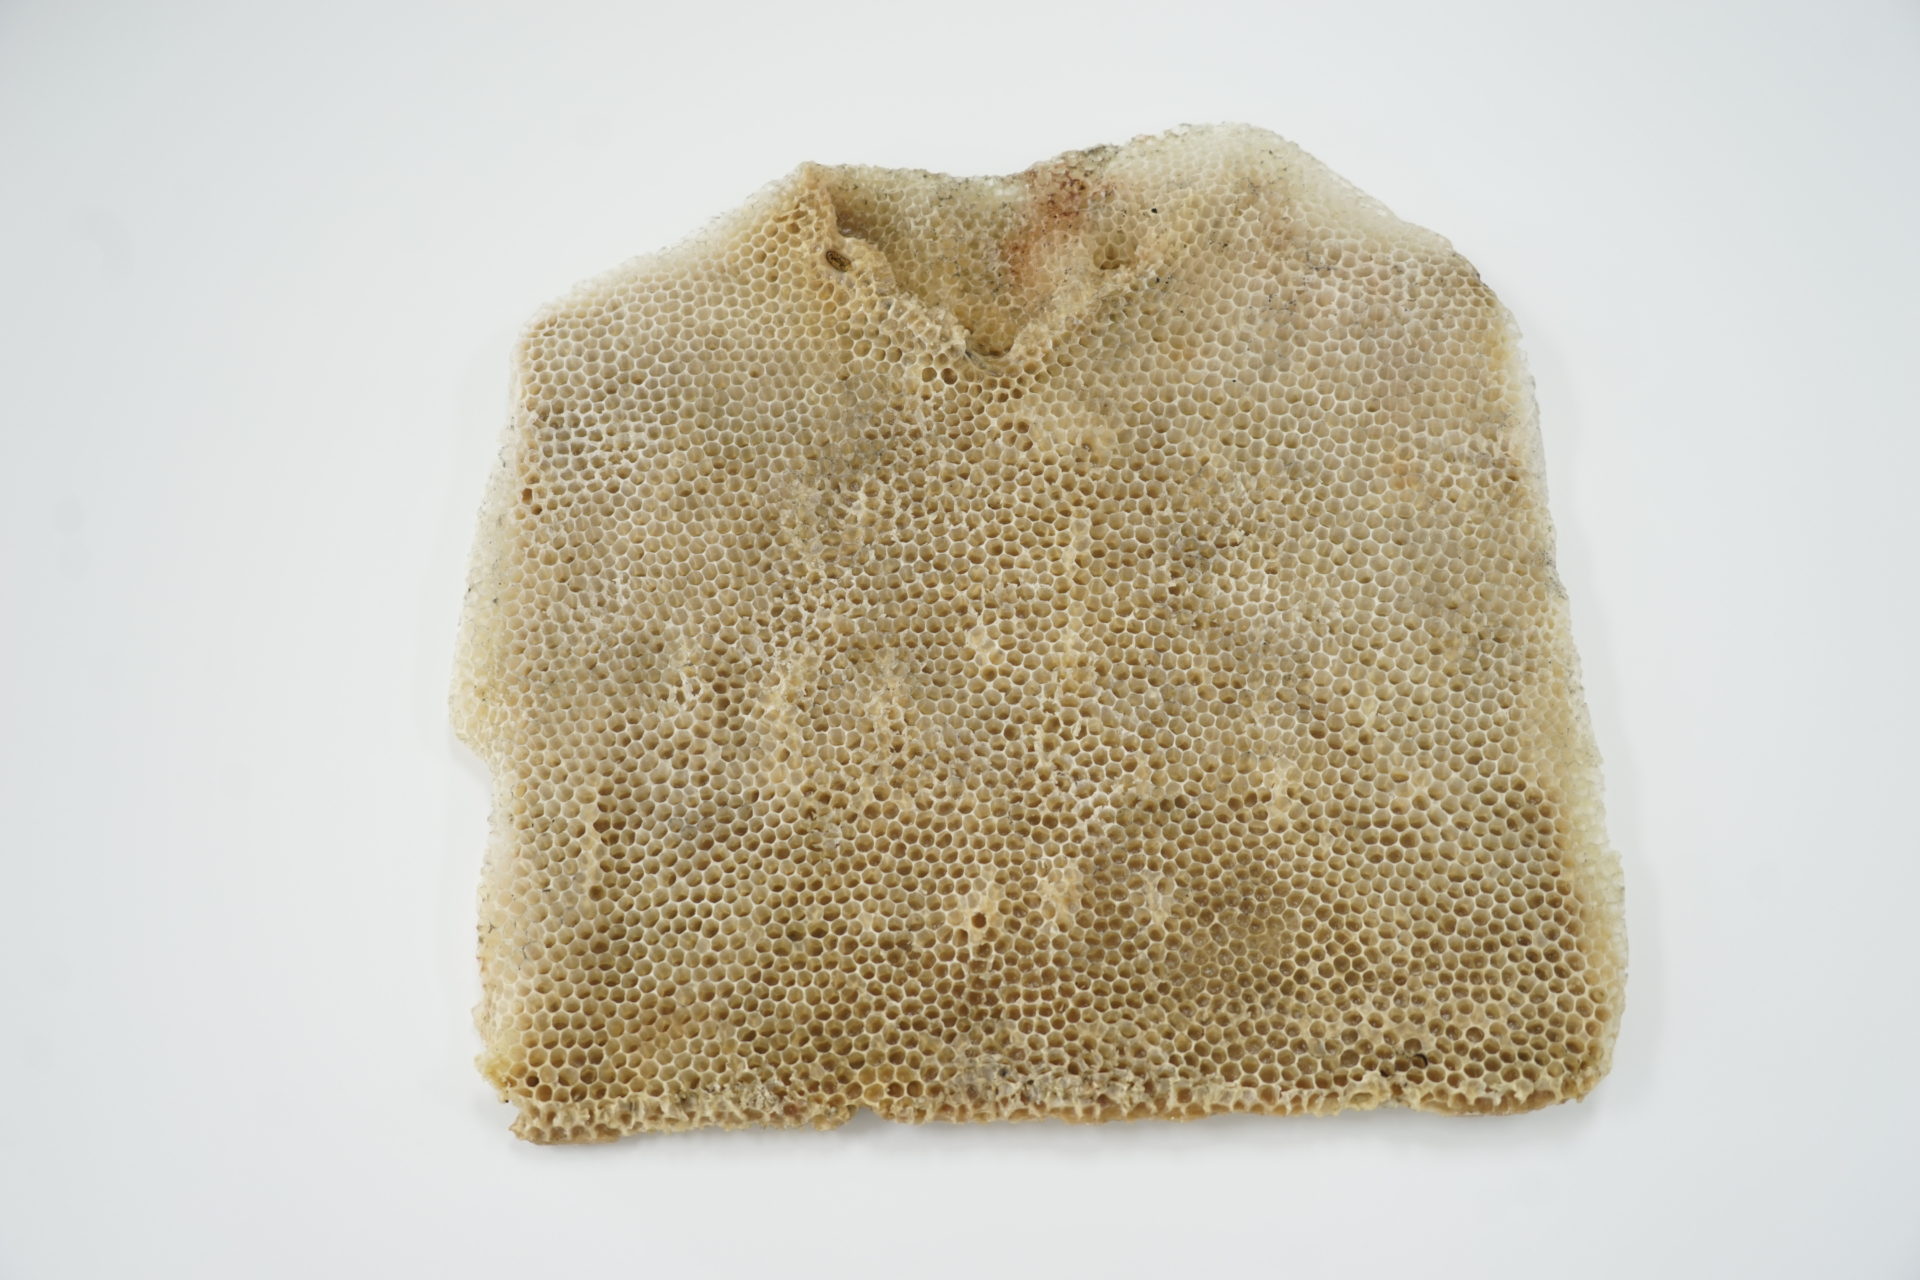 Franz Ehmann, 'Fourteen Days', 2018, Beeswax on cotton shirts with resin buttons